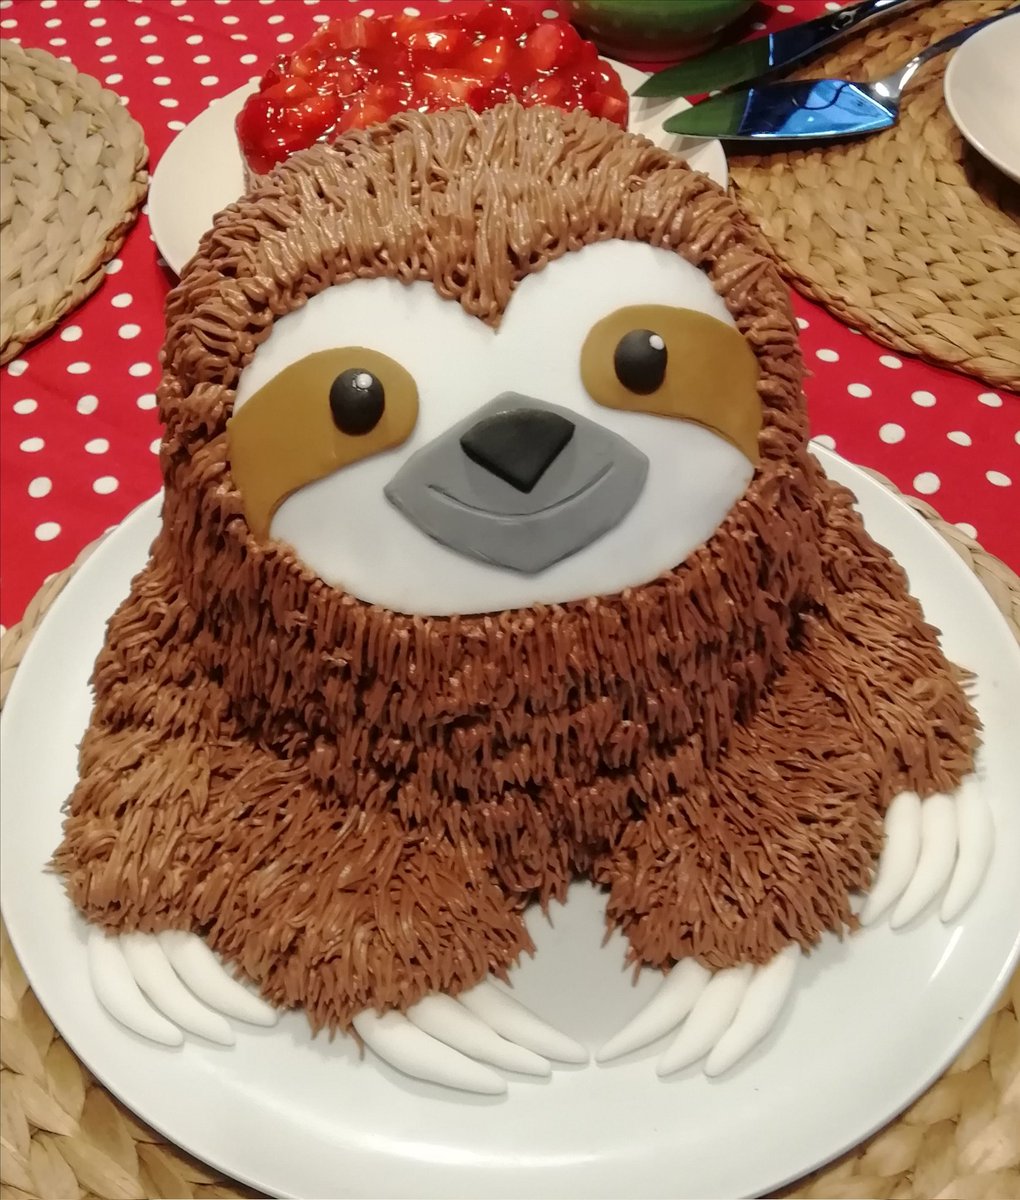 My brother LOVES sloths, so I made him a sloth birthday cake.